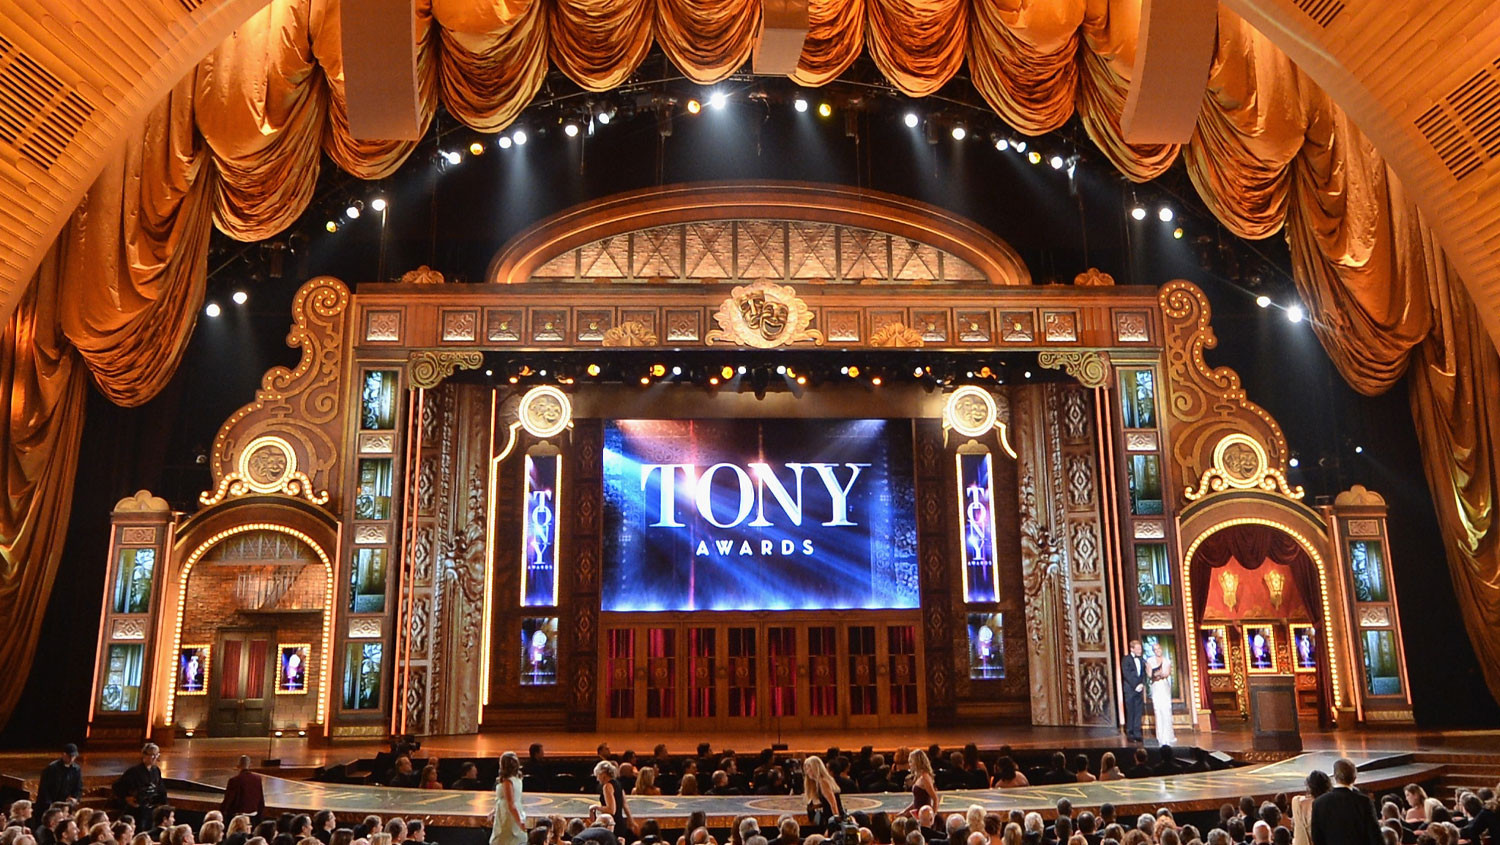 Tony Awards 2023: Date, time, how to watch, expected performances - Opoyi